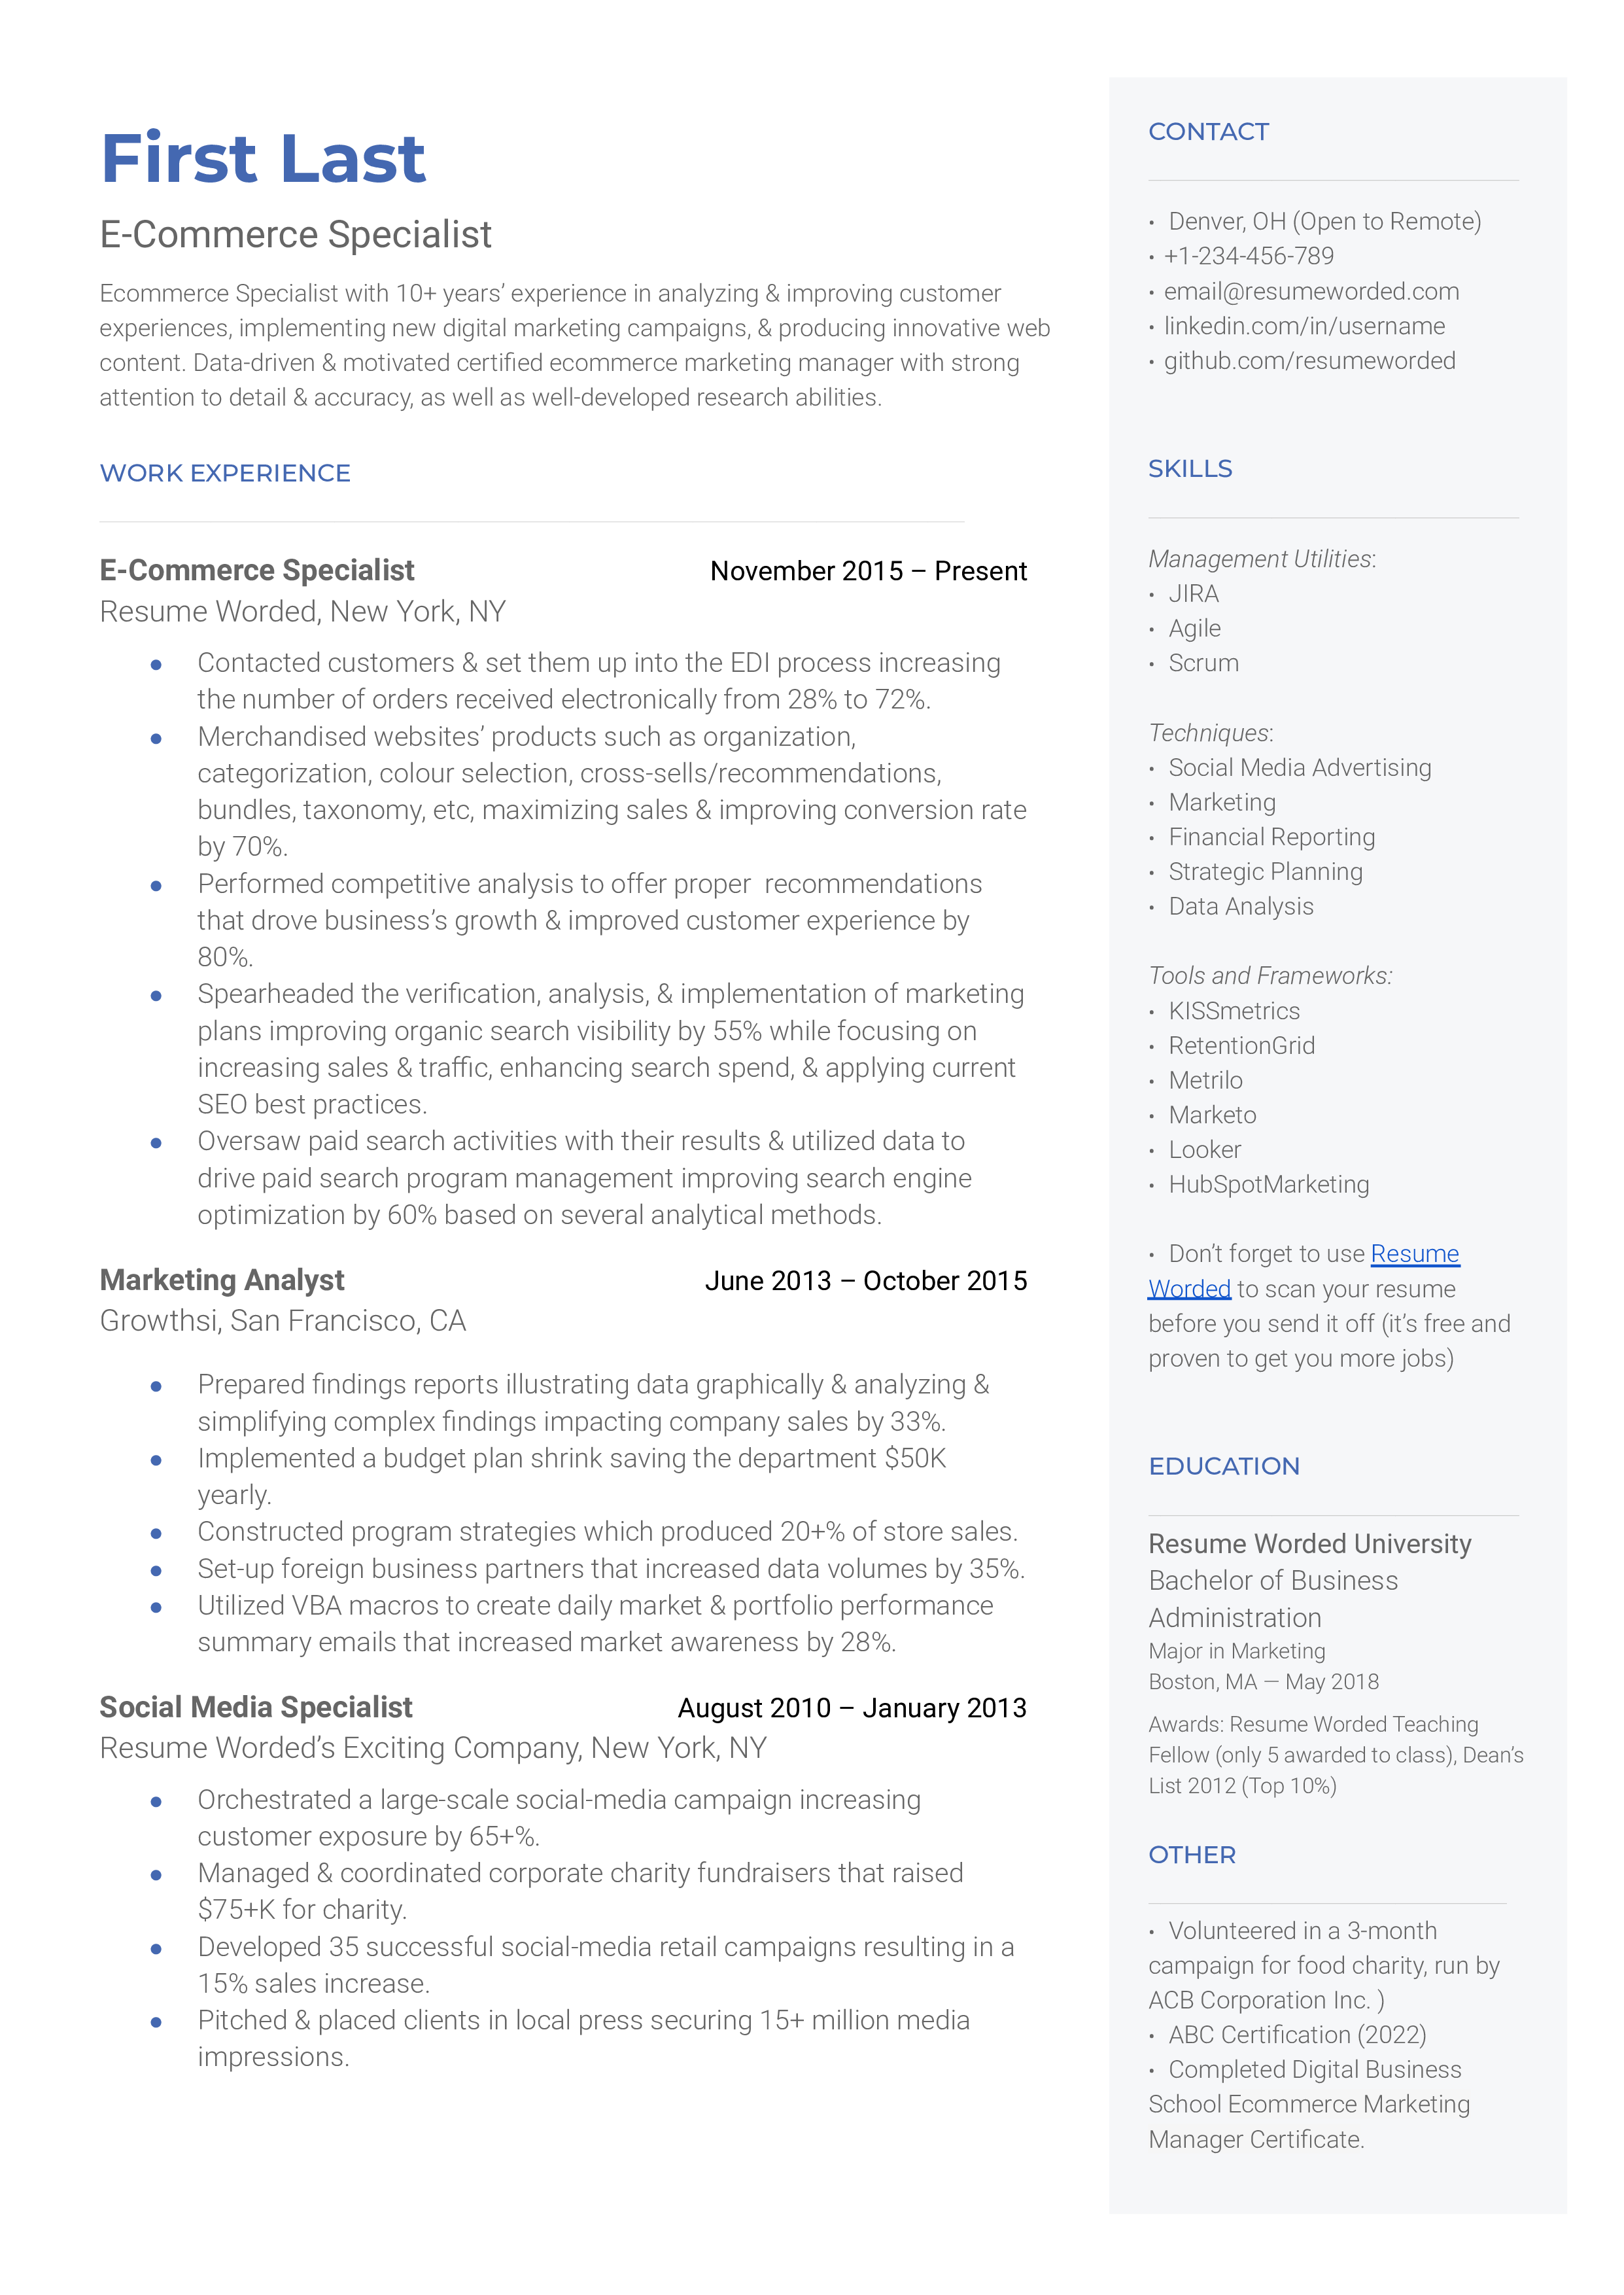 E-Commerce Specialist Resume Template + Example